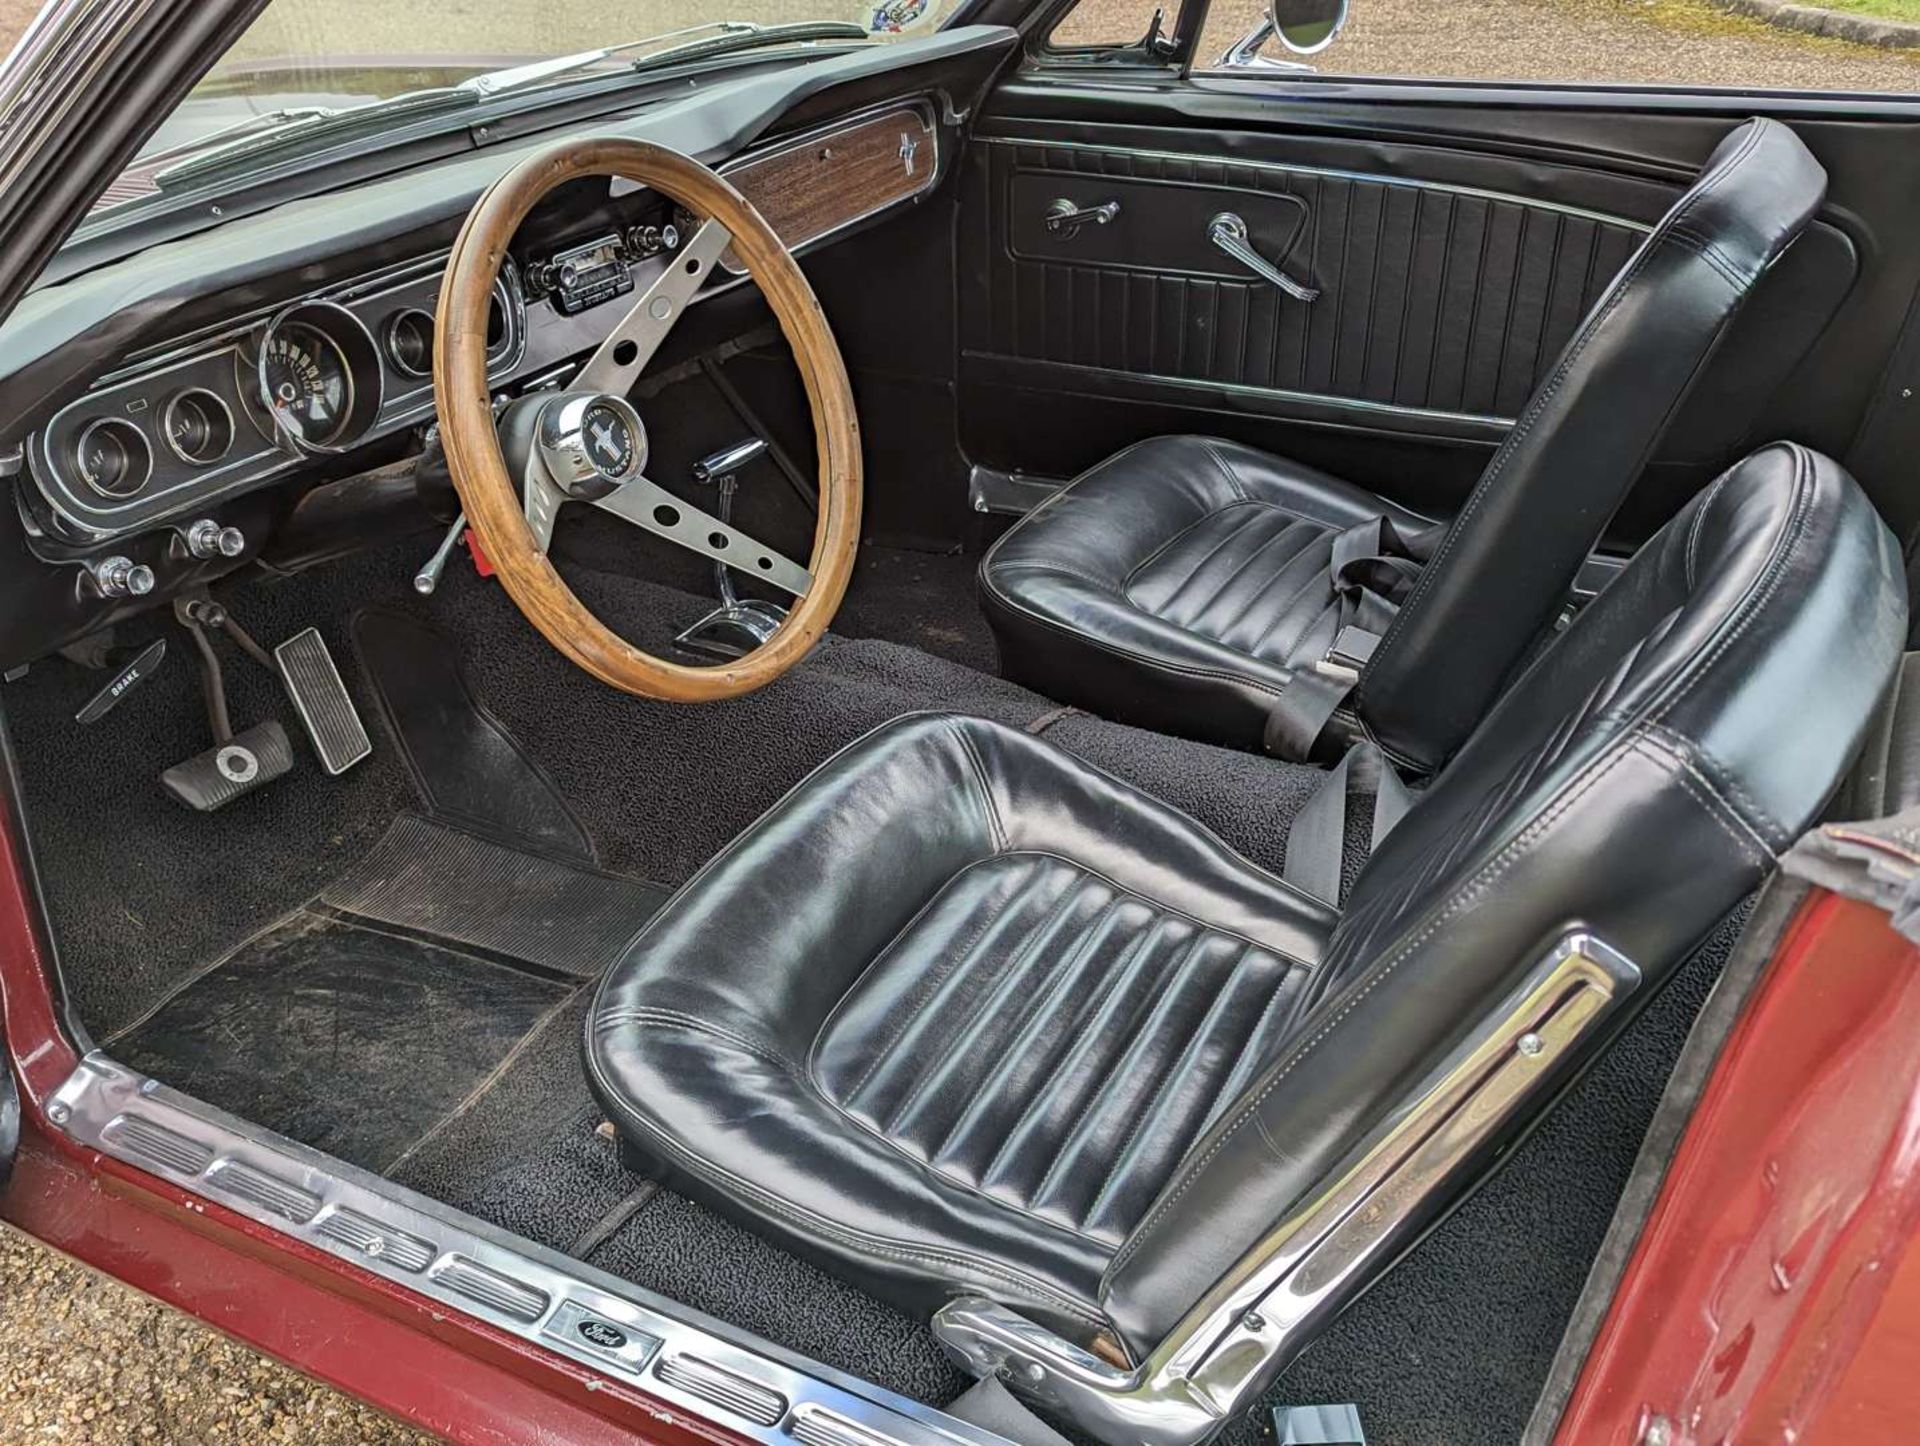 1965 FORD MUSTANG 5.0 V8 FASTBACK AUTO LHD - Image 9 of 30